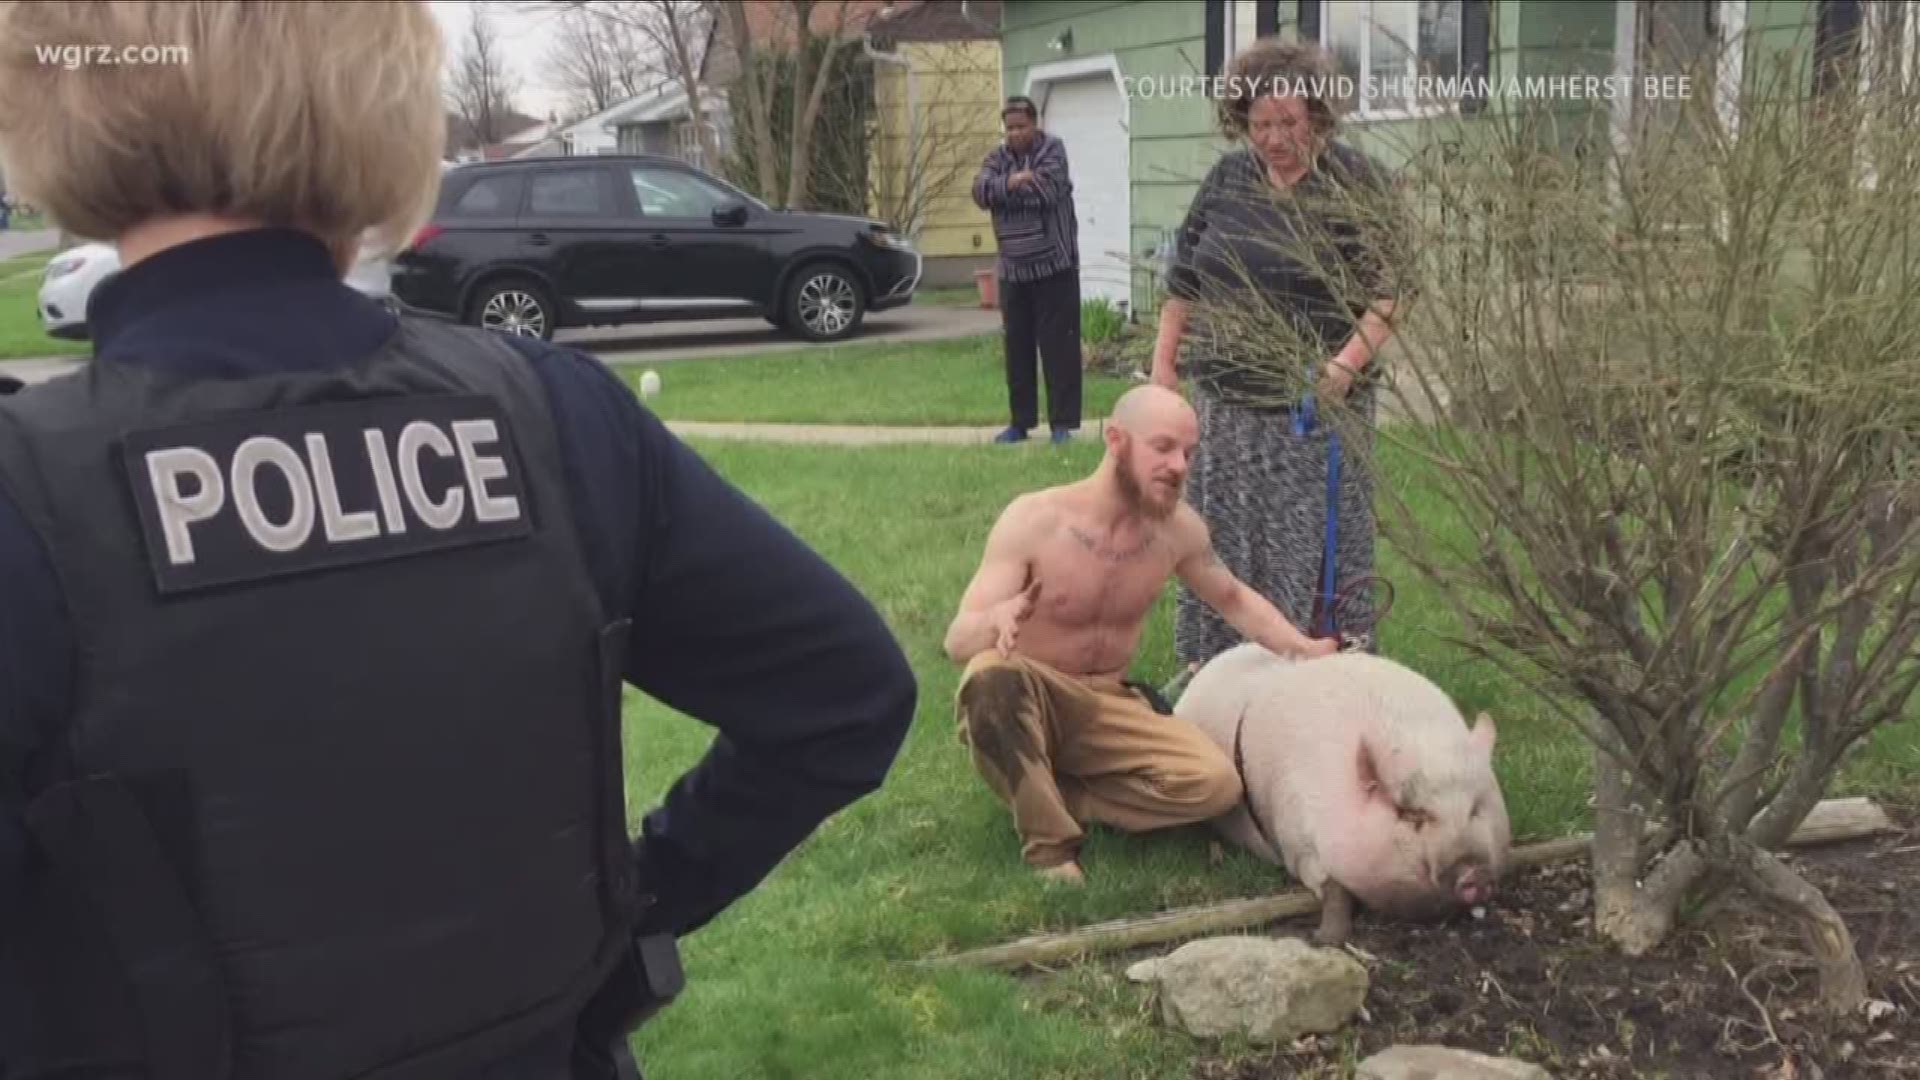 police were called to Coronation drive to help catch a loose pig